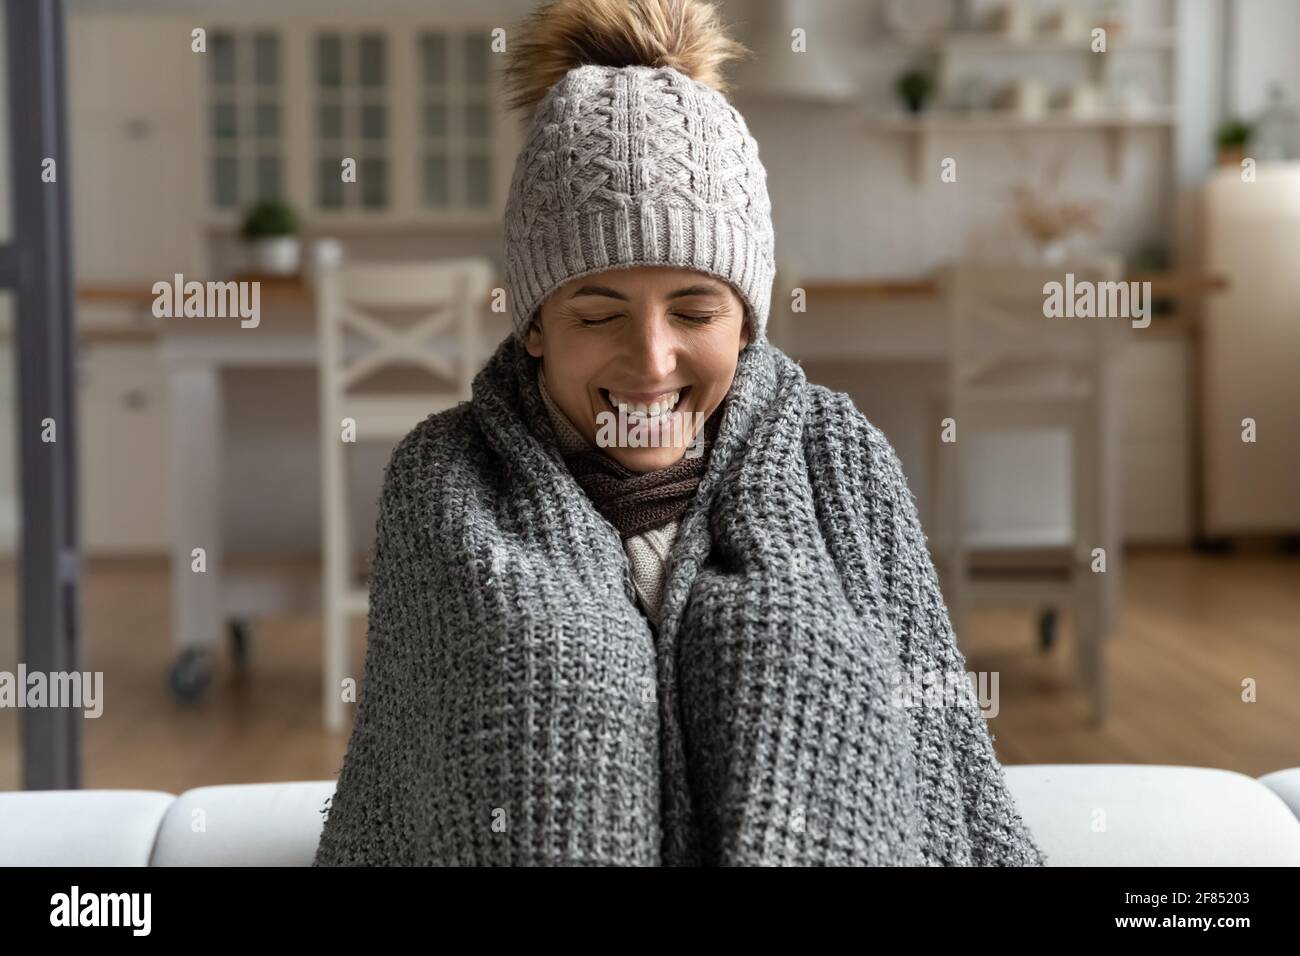 Joyful lady in cap and plaid struggle with cold indoors Stock Photo